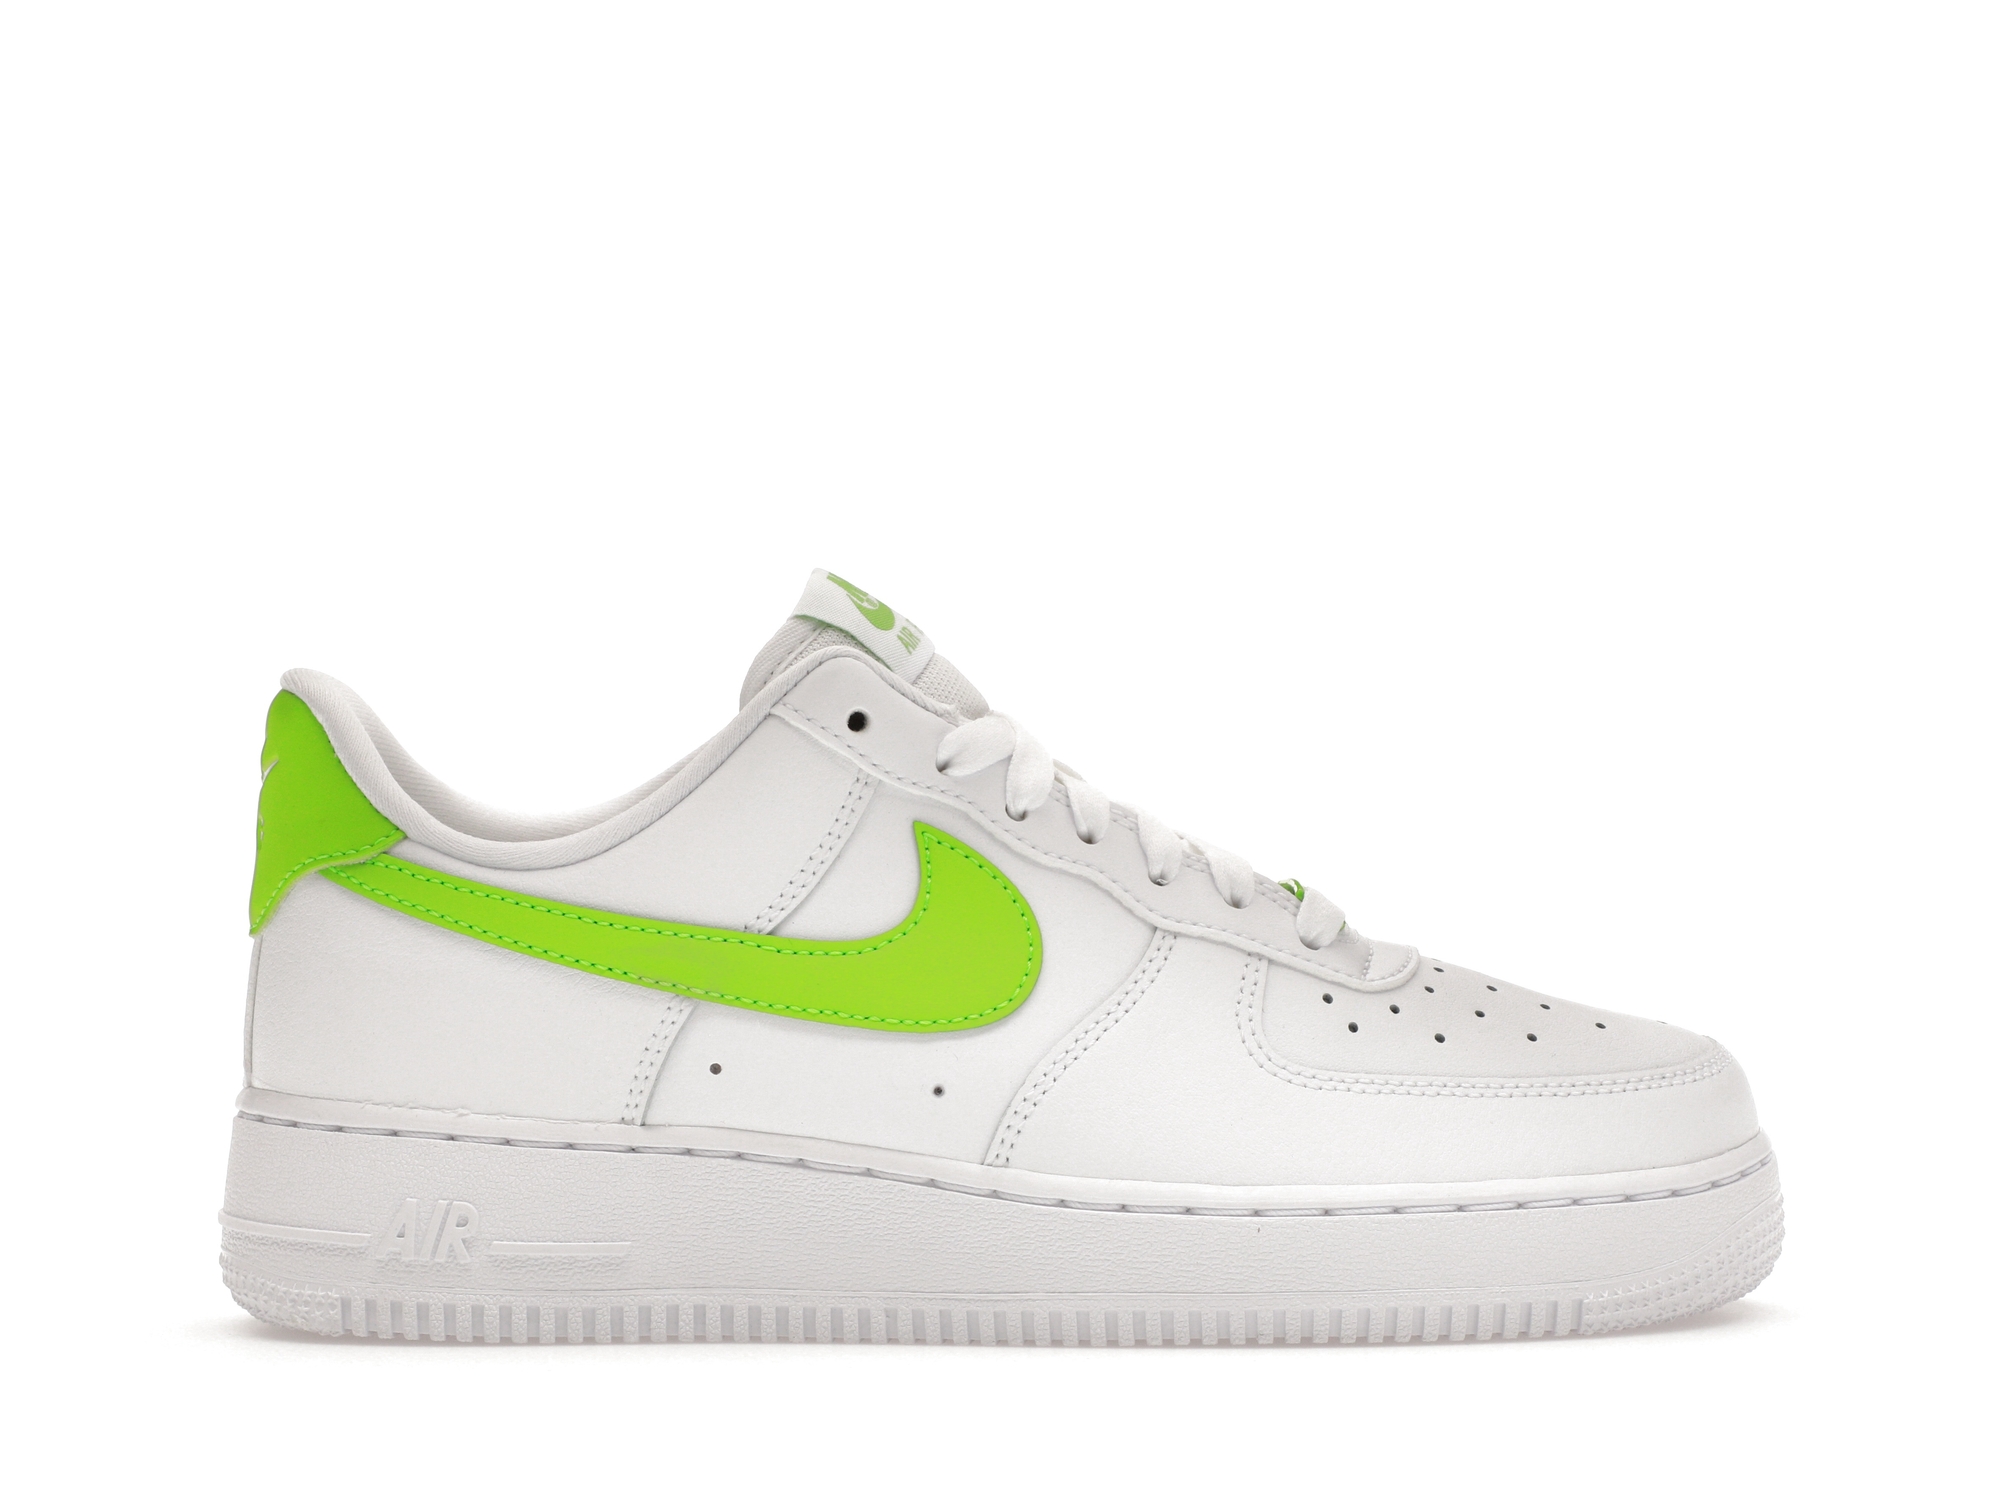 Nike Air Force 1 Low White Action Green (Women's) - DD8959-112 - US